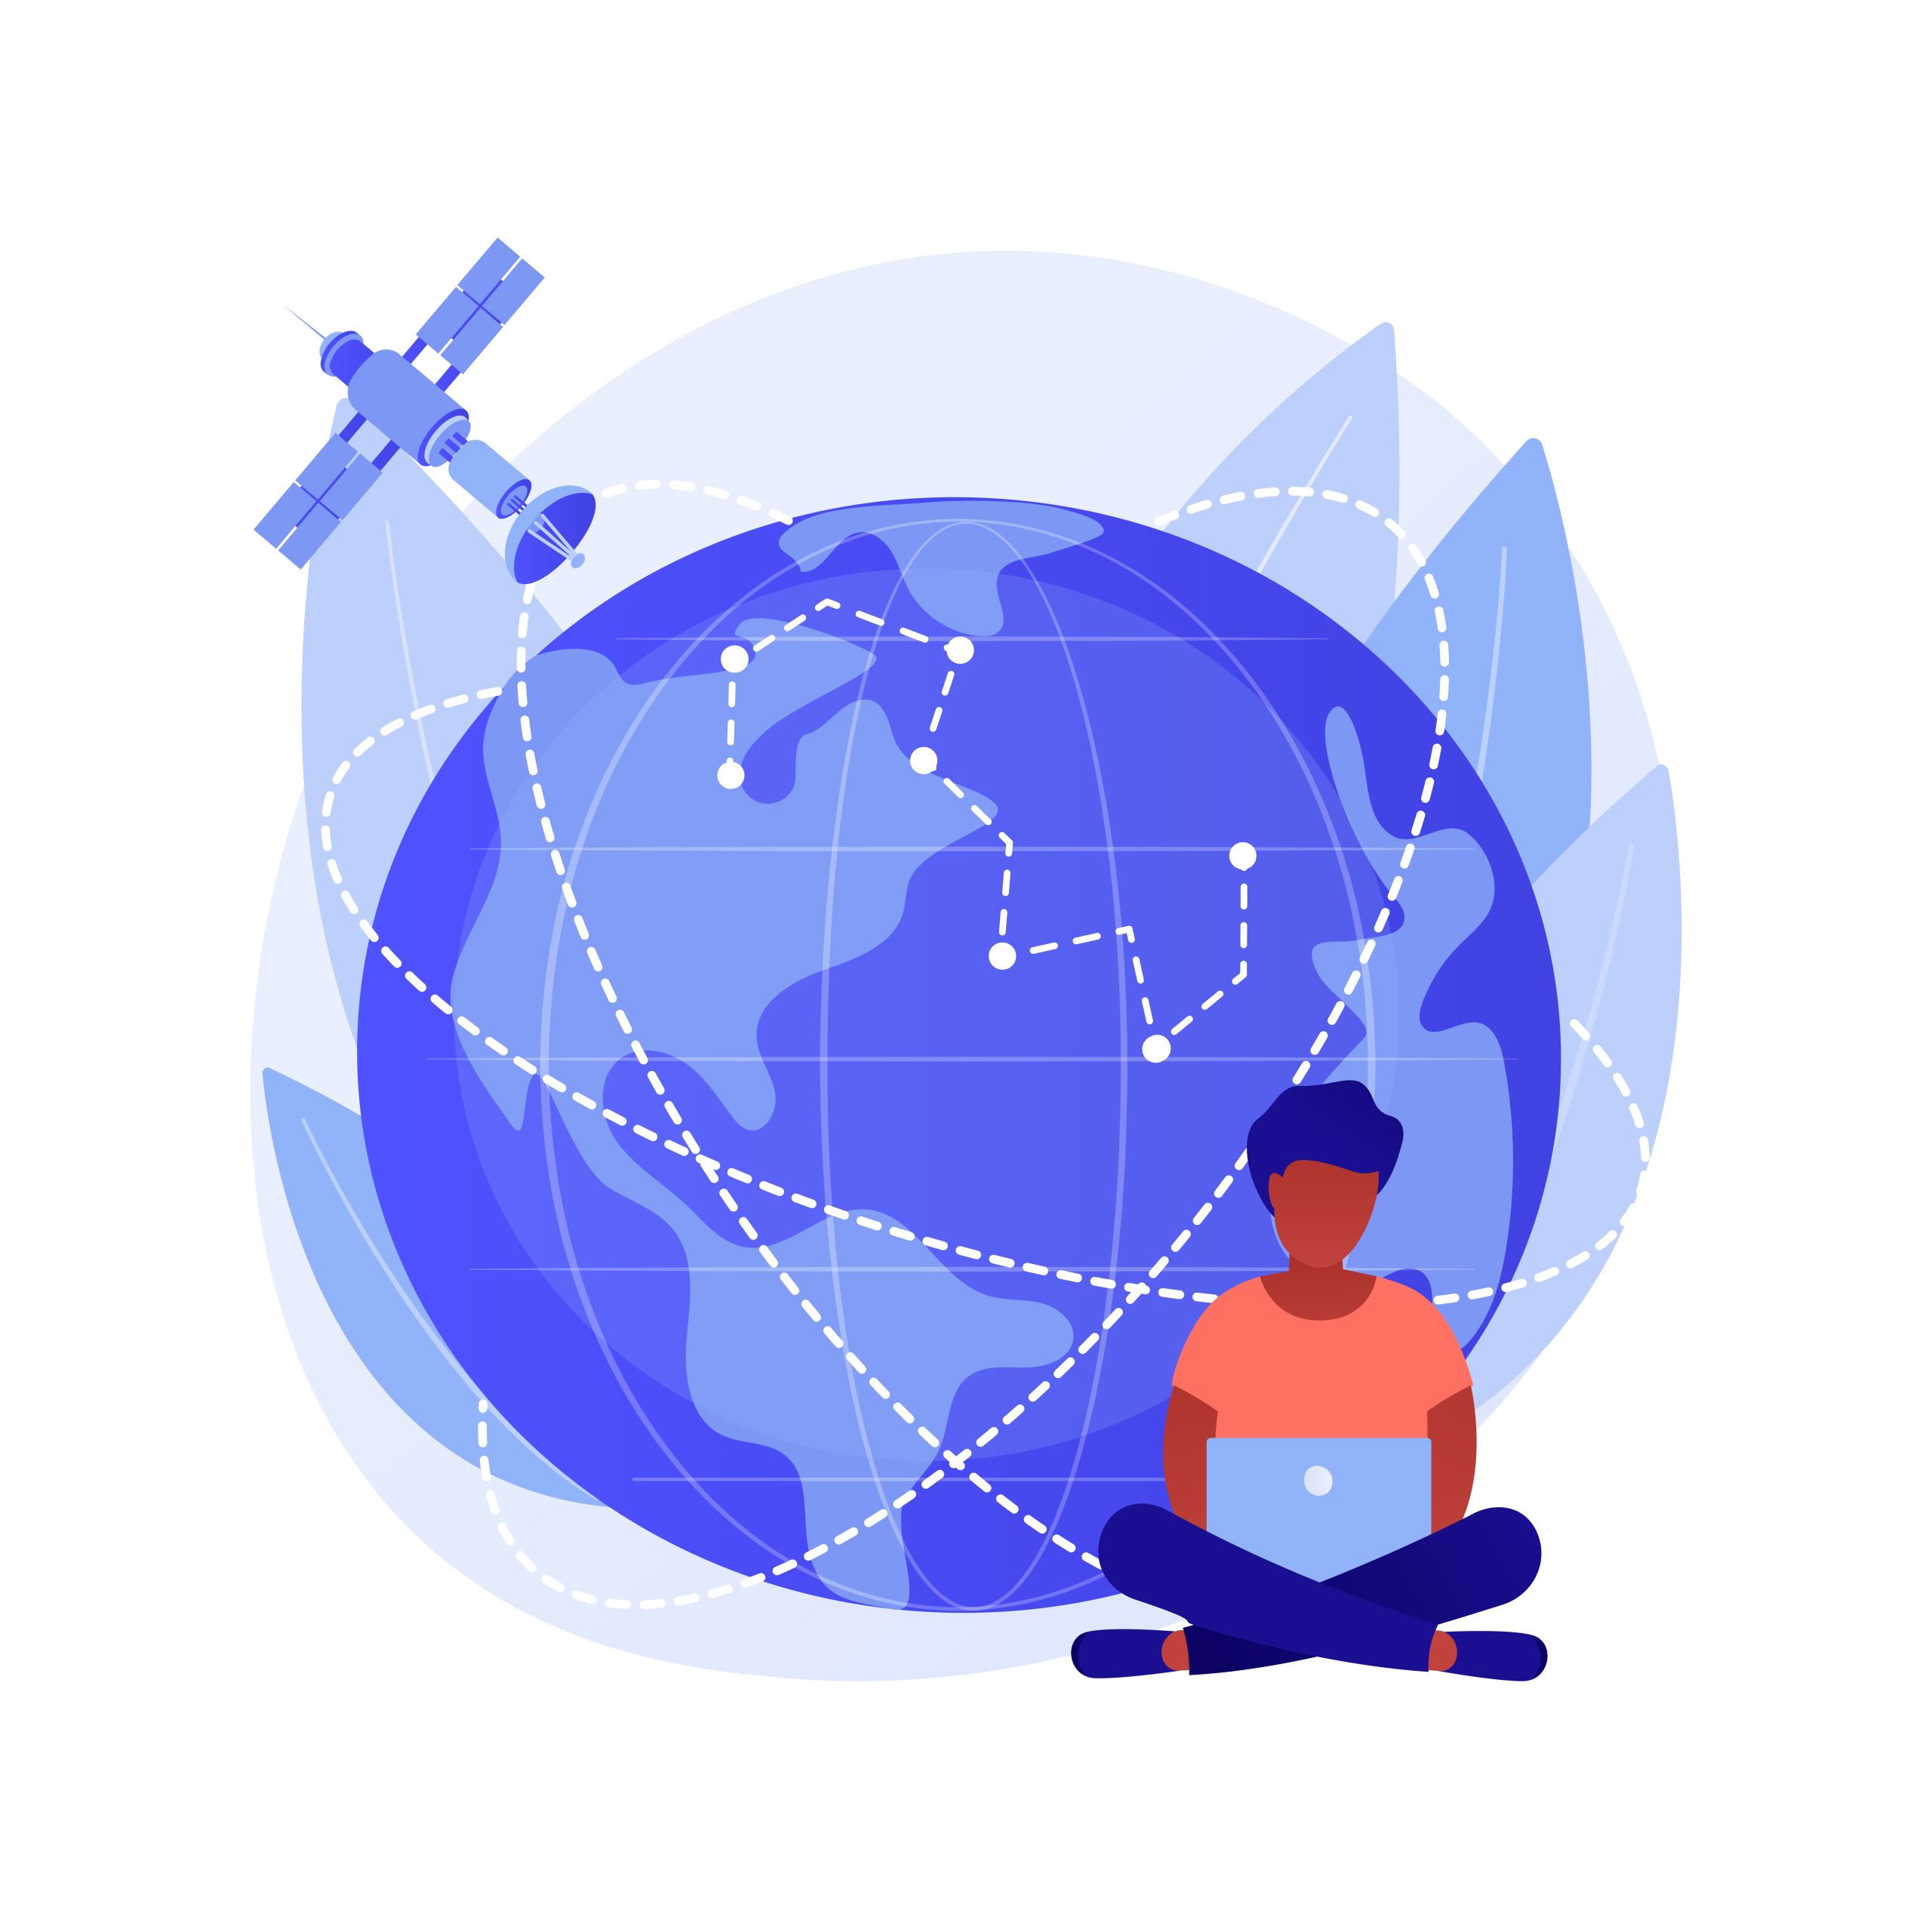 Gps coverage area. Earth observation. Space communications idea, orbiting satellite navigation, modern technologies. Outer space, cosmos, universe. Vector isolated concept metaphor illustration